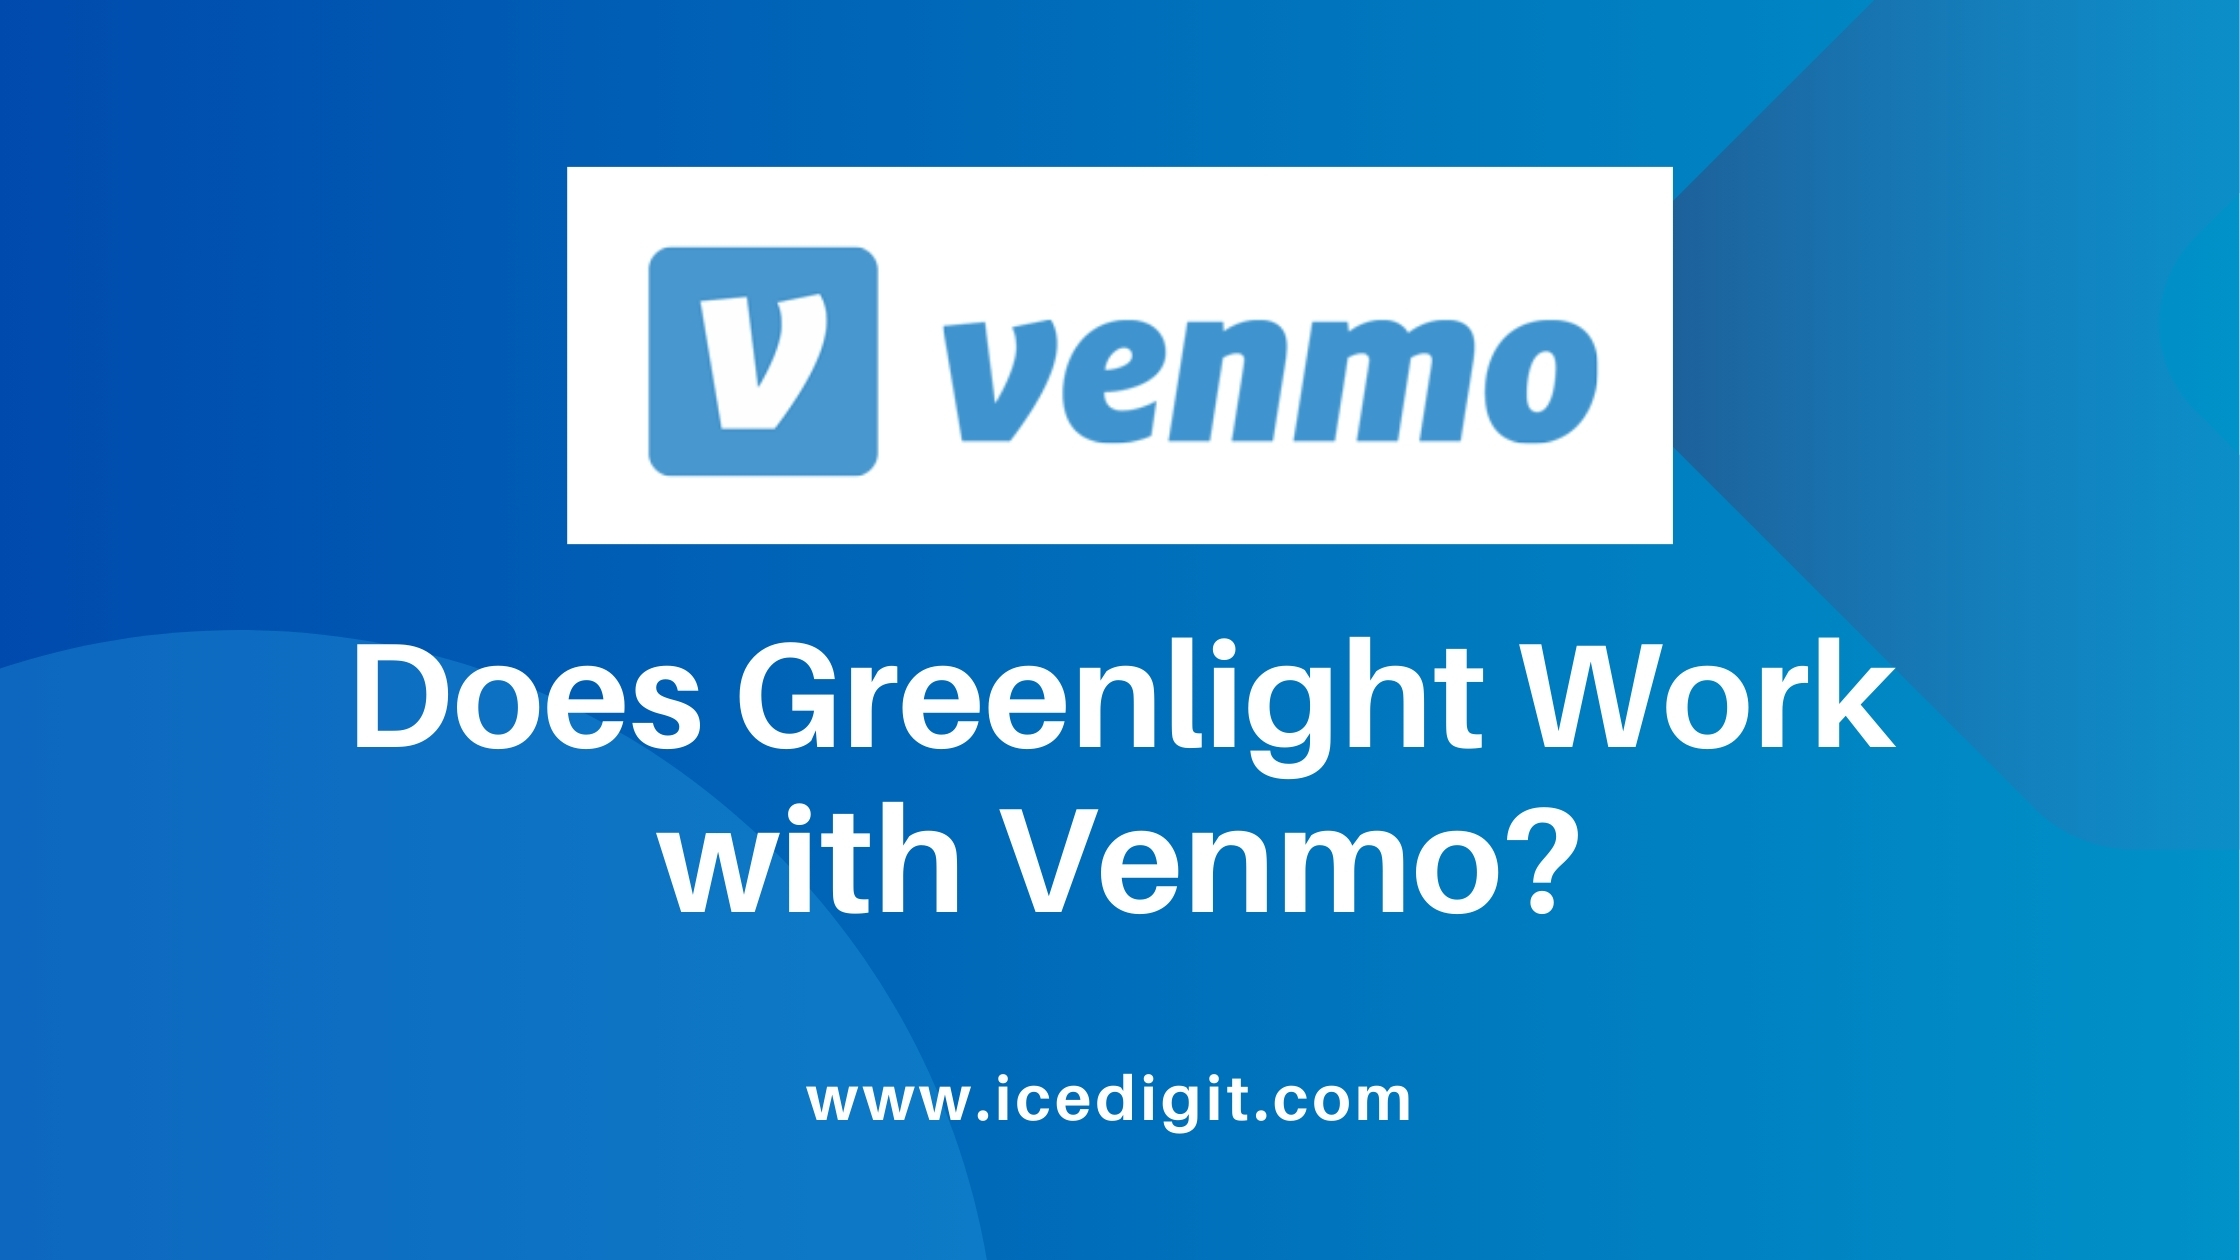 Does Greenlight Work with Venmo